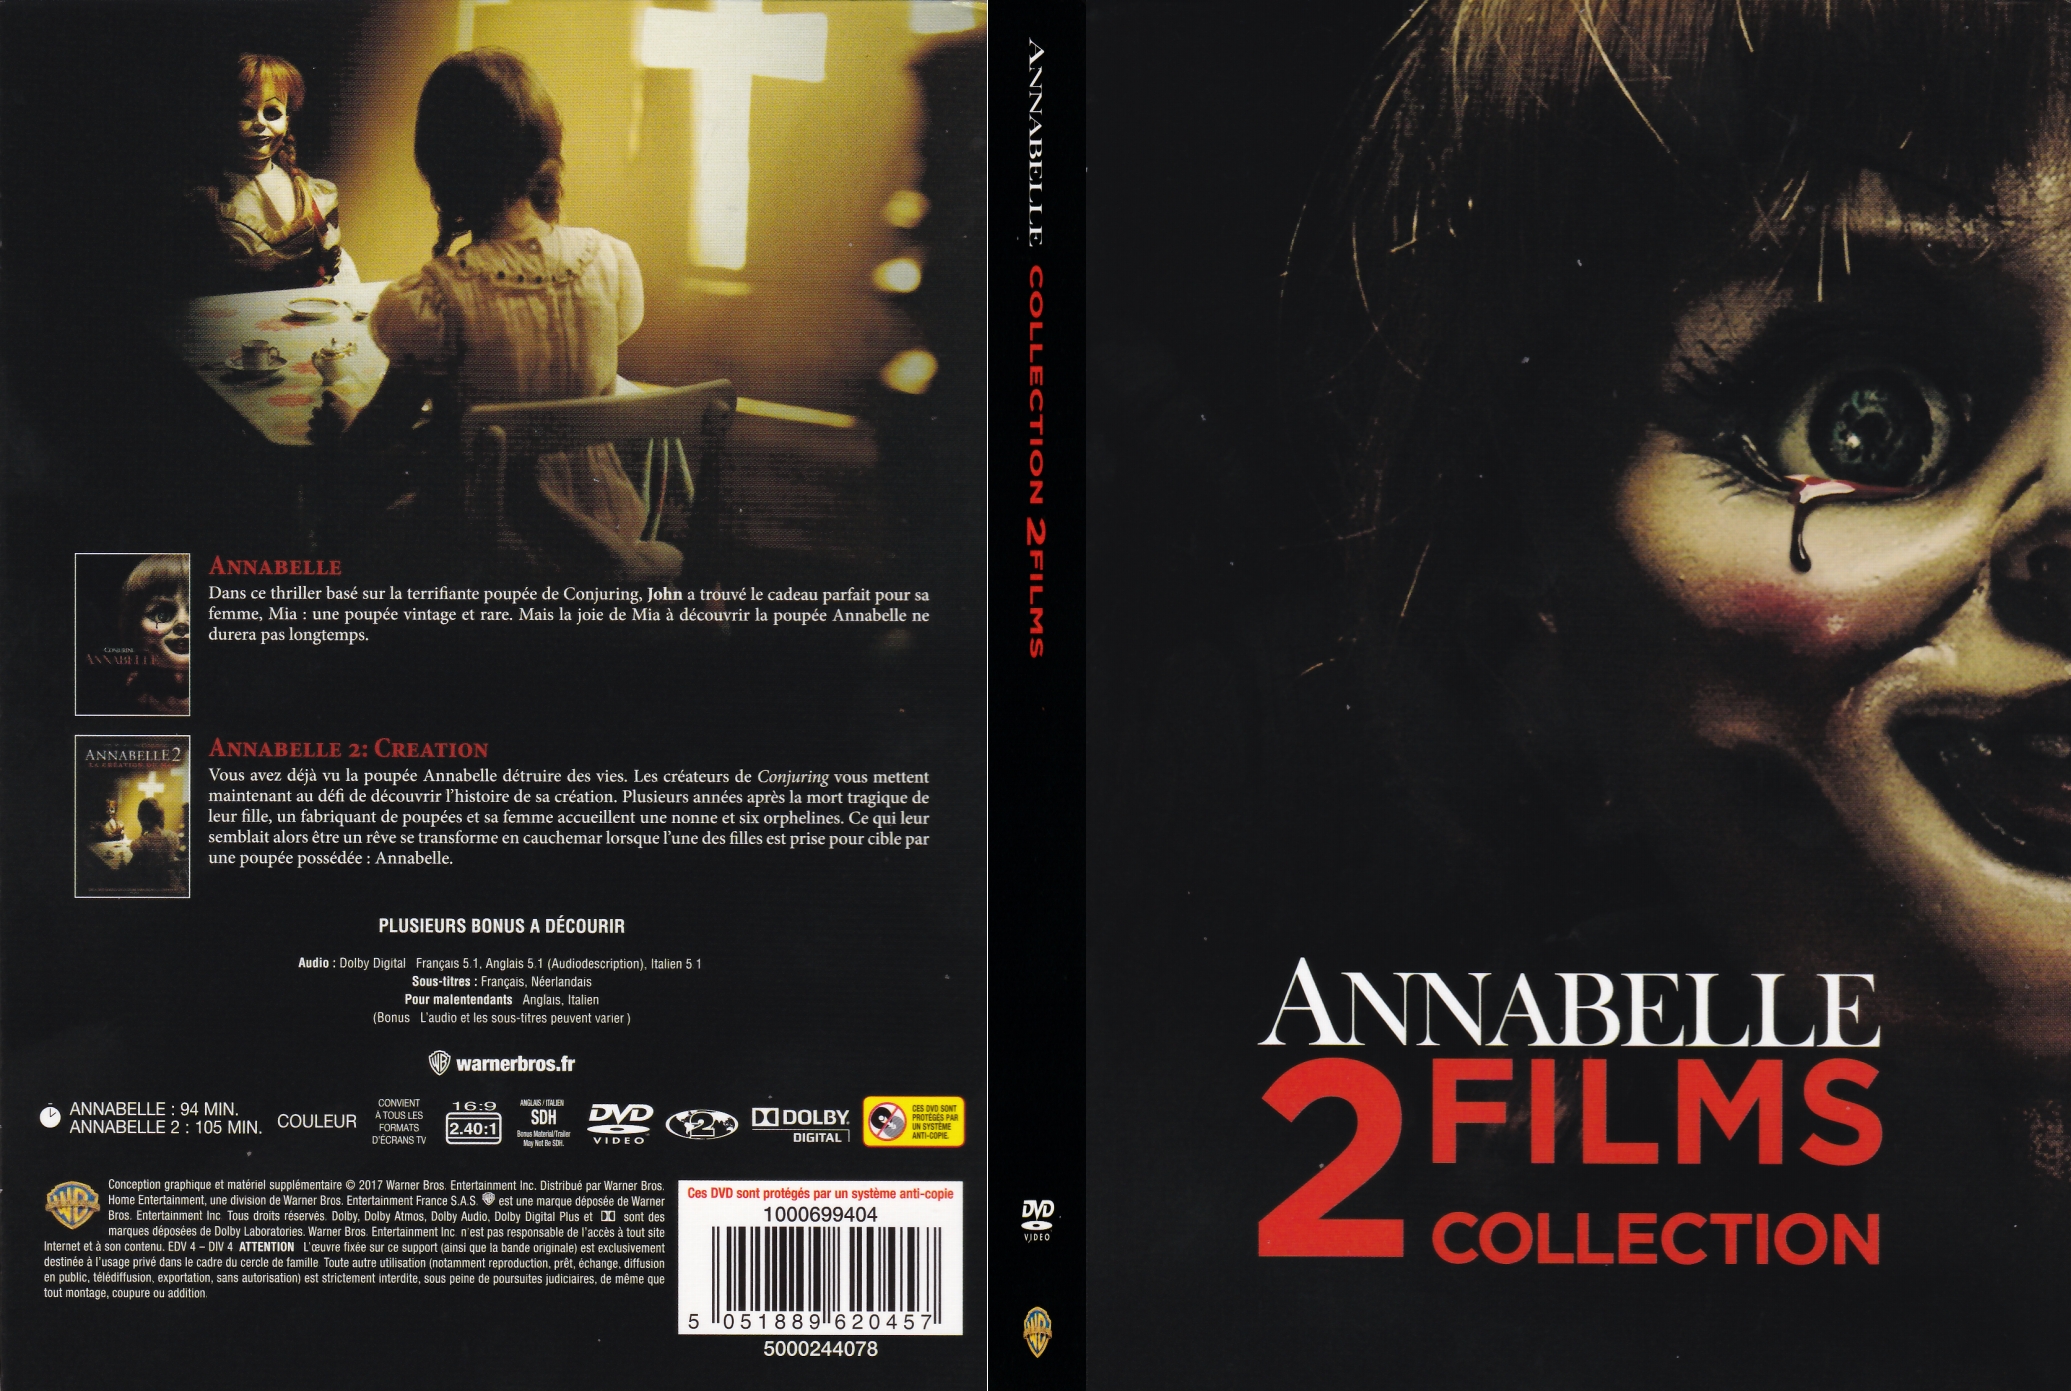 Jaquette DVD Annabelle Collection 2 films